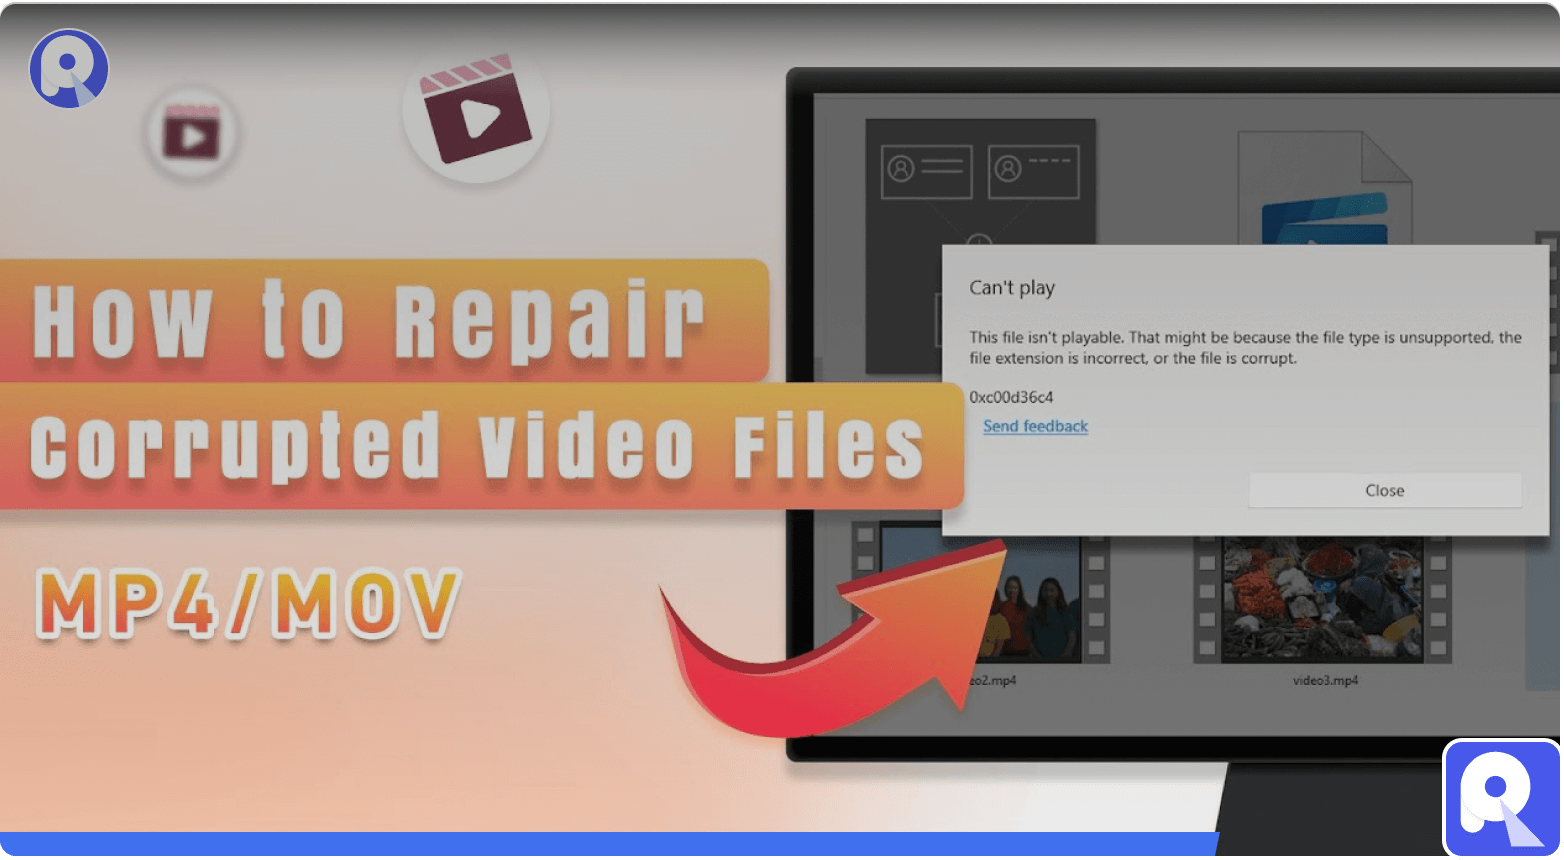 retrieve-contact-from-iphone-video-guide